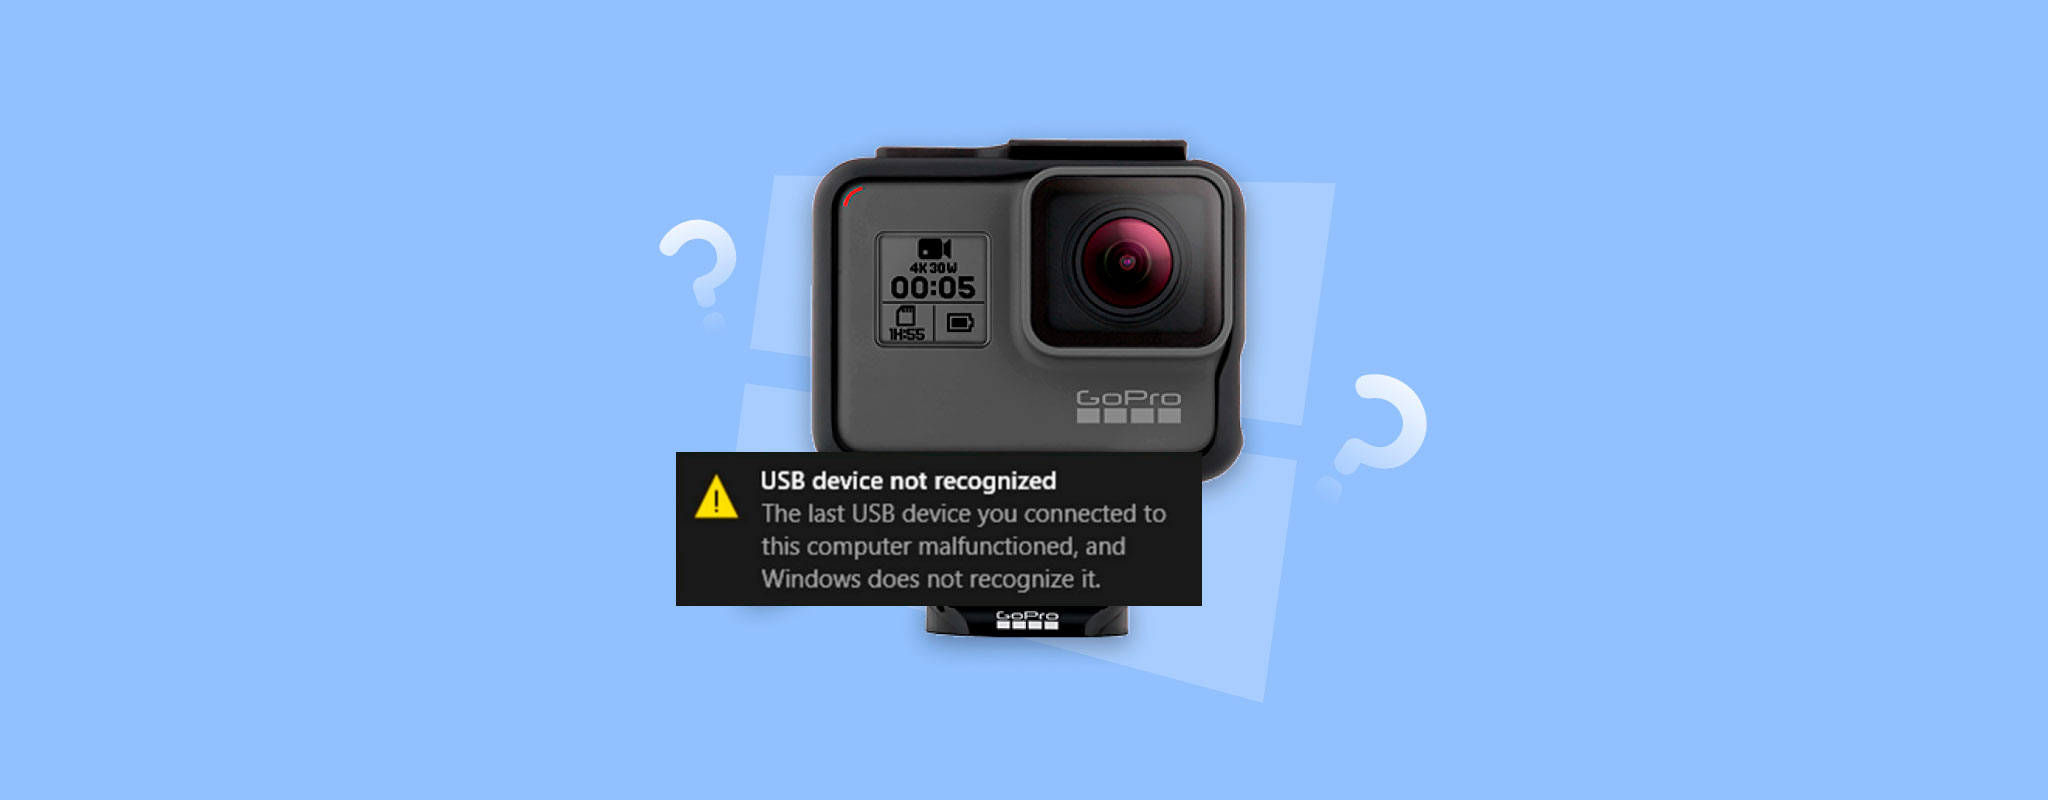 Lujo construcción naval Por nombre GoPro Is Not Showing Up on PC: How to Fix and Recover Files